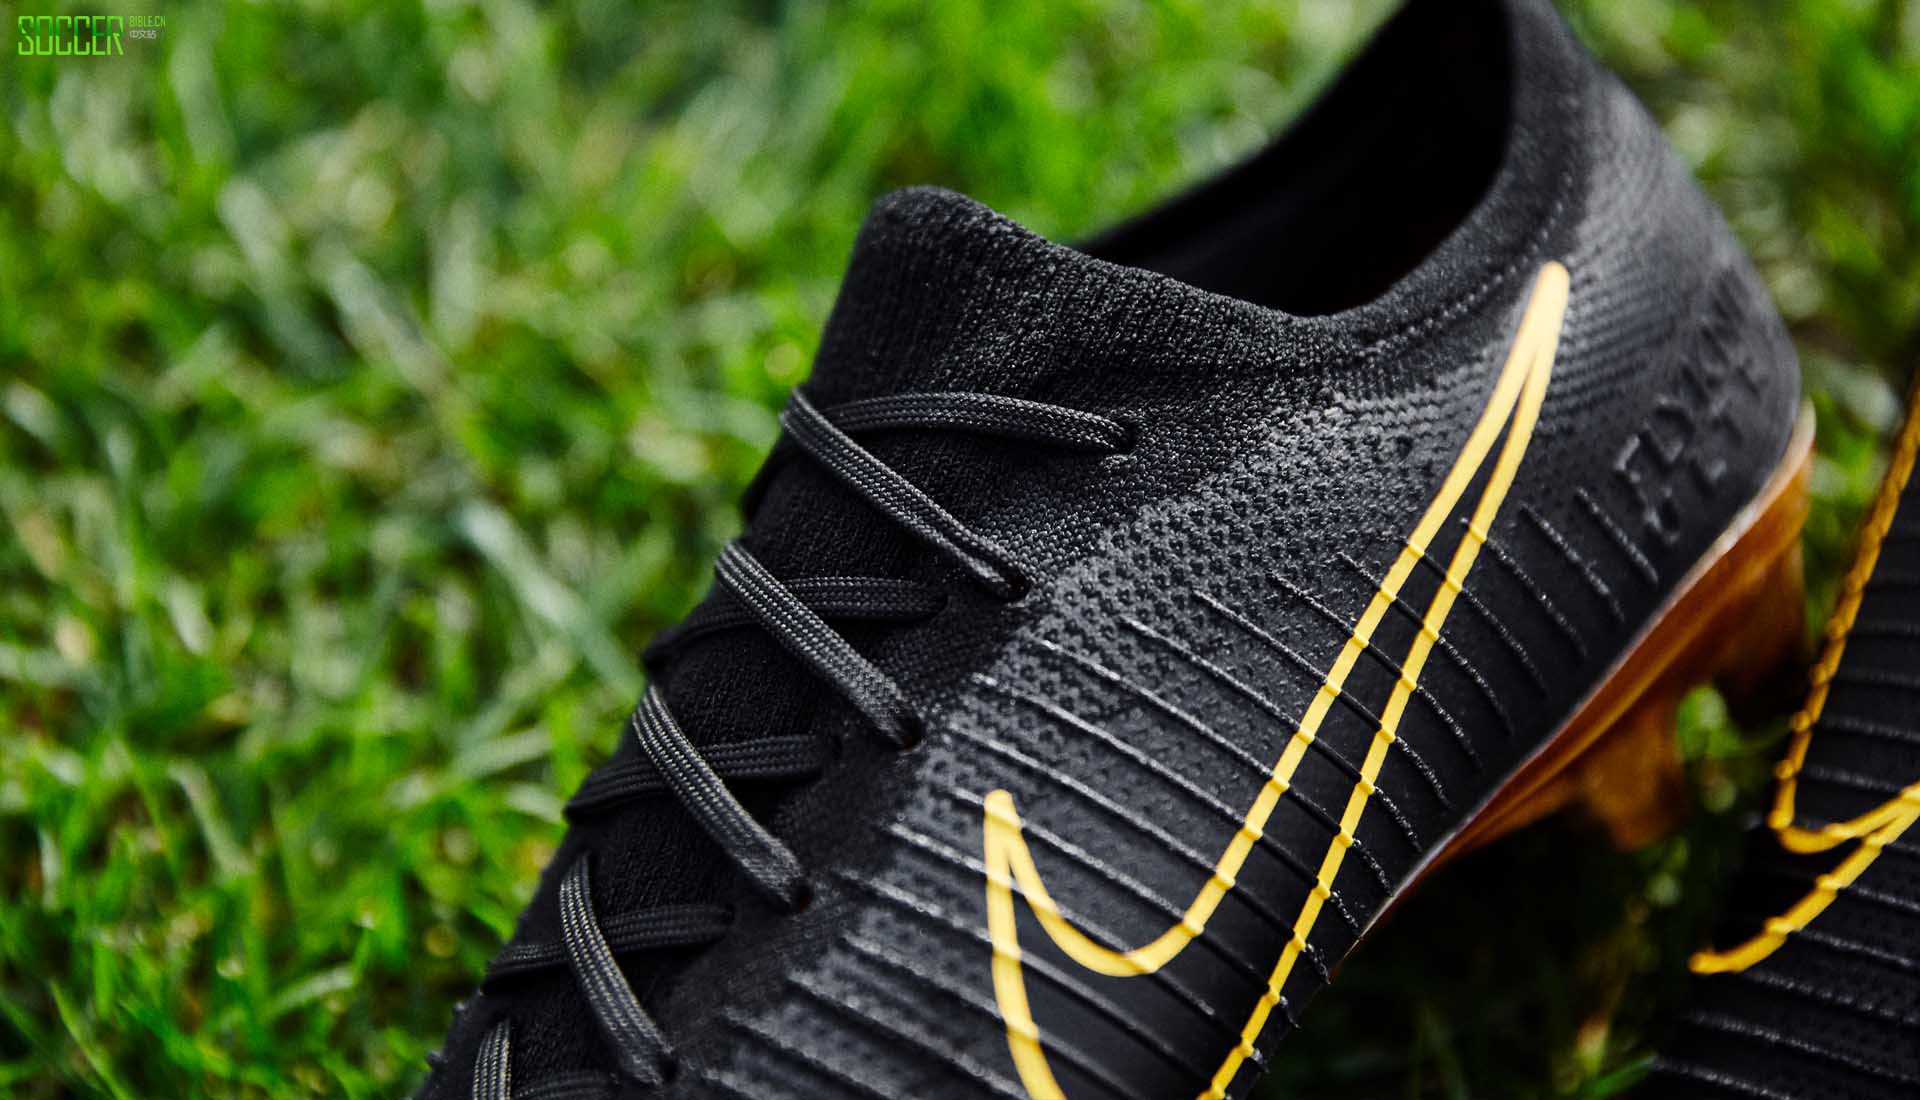 How To Customize Your Nike Mercurial Vapor In 5 YouTube